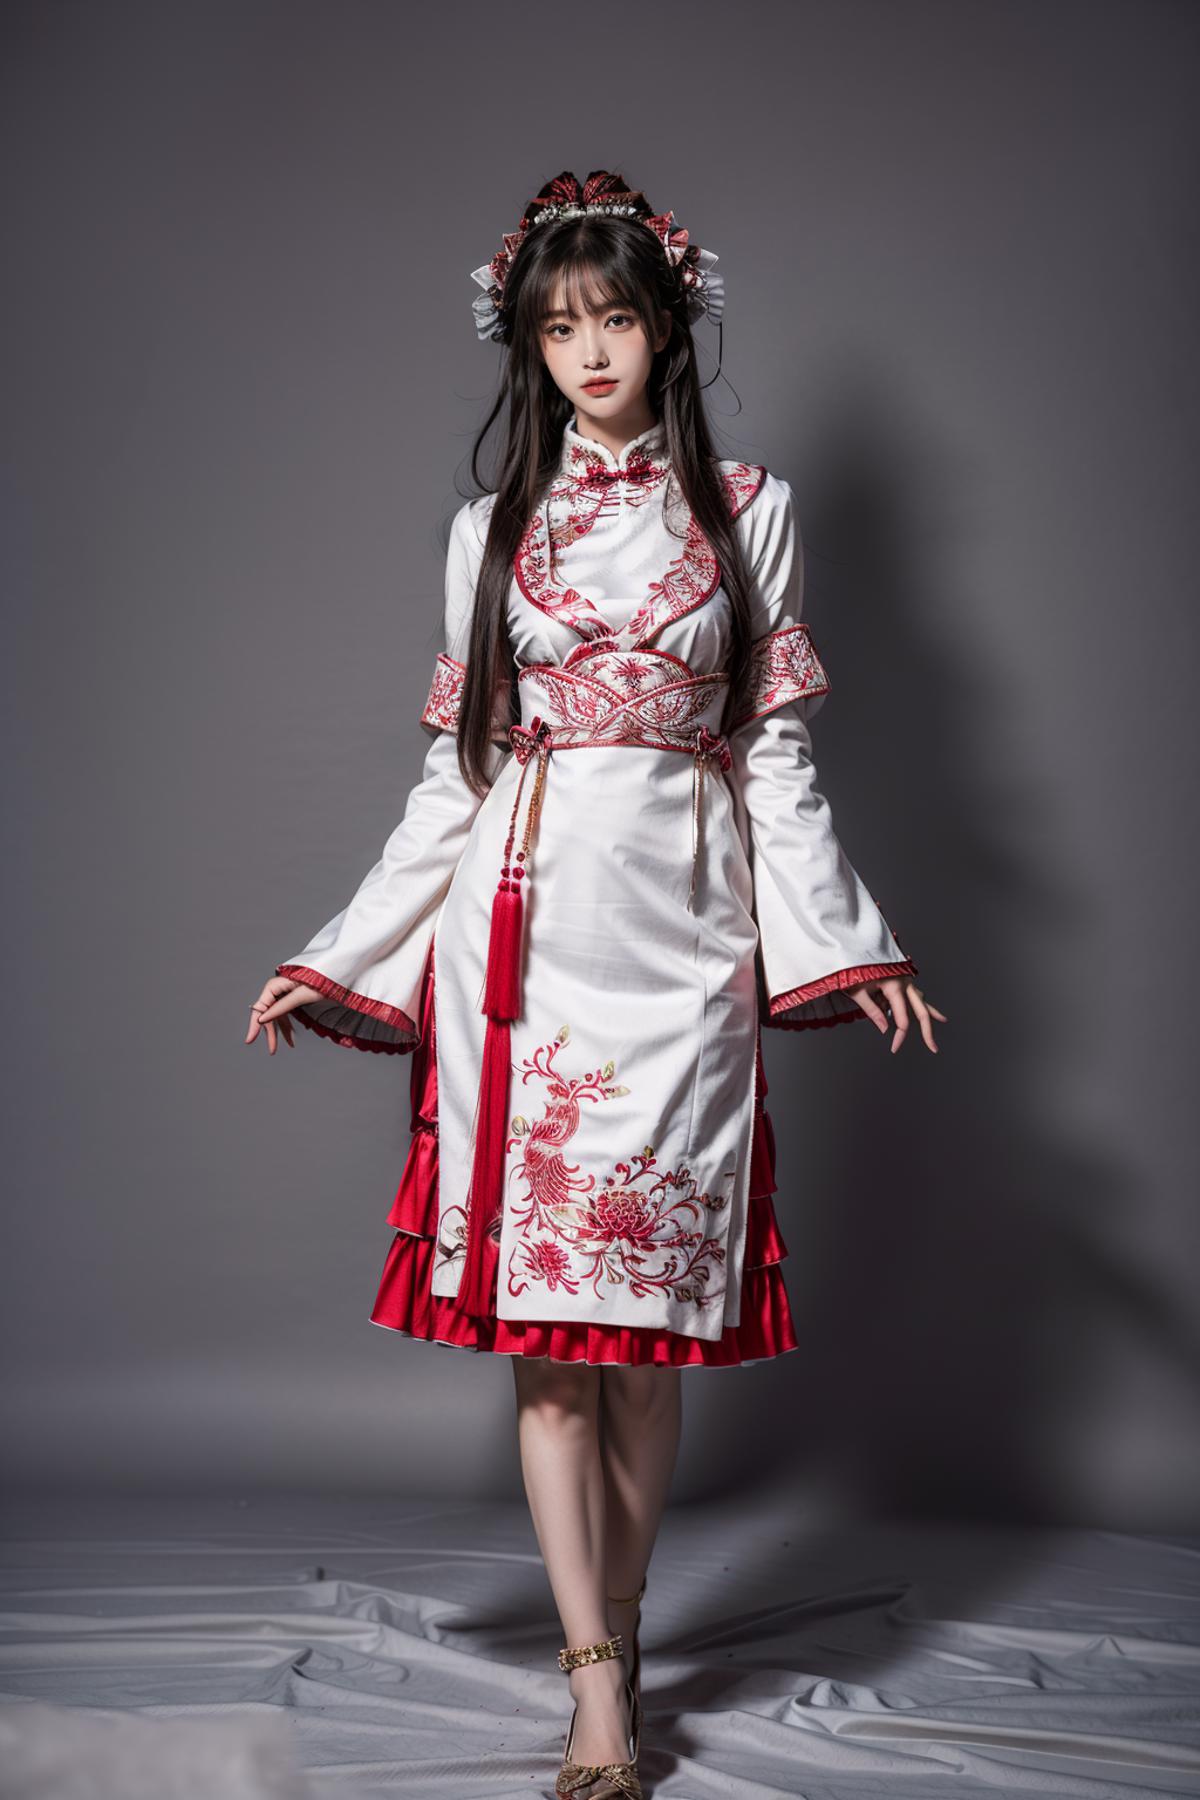 [Realistic] New Chinese-style clothing | 新中式服装 vol.2 image by cyberAngel_